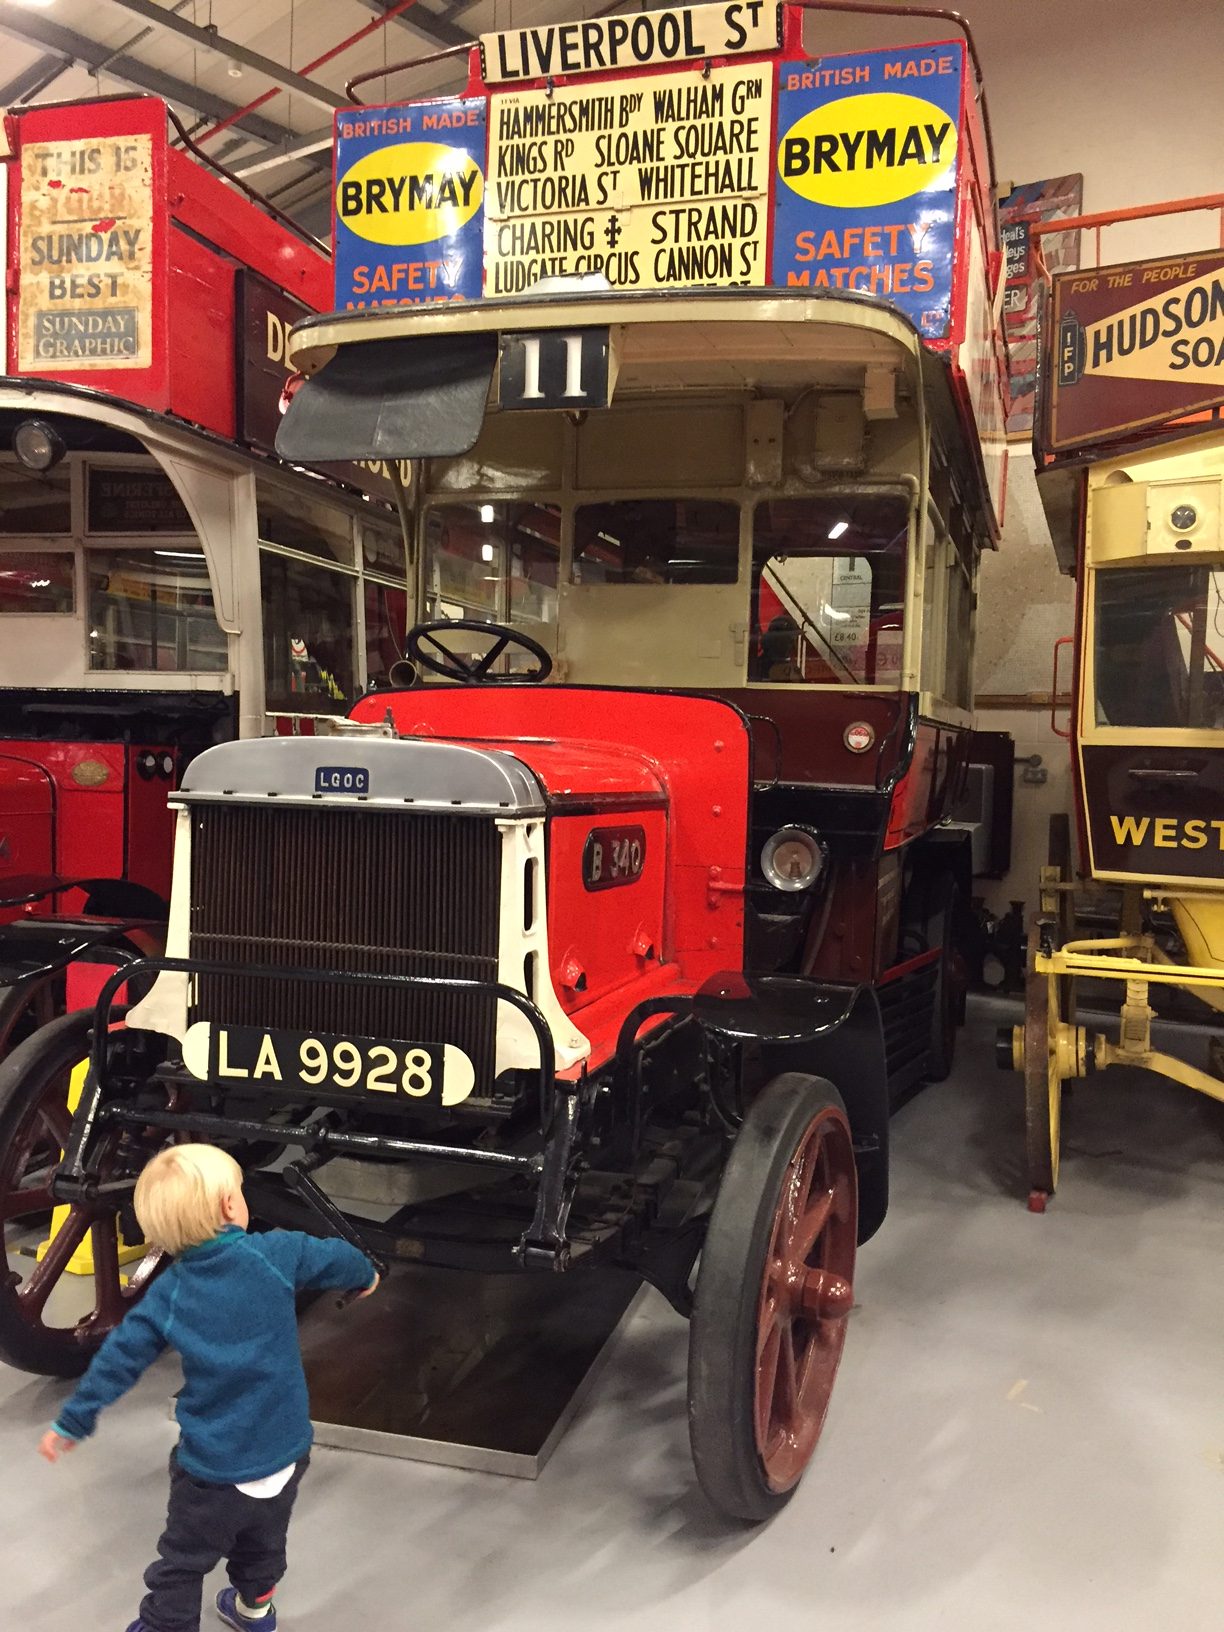 London Transport Museum: Well before Bobby, this. LA 9928. LGOC B-type bus B340. Solid tyres and a very young chap trying to turn the engine.